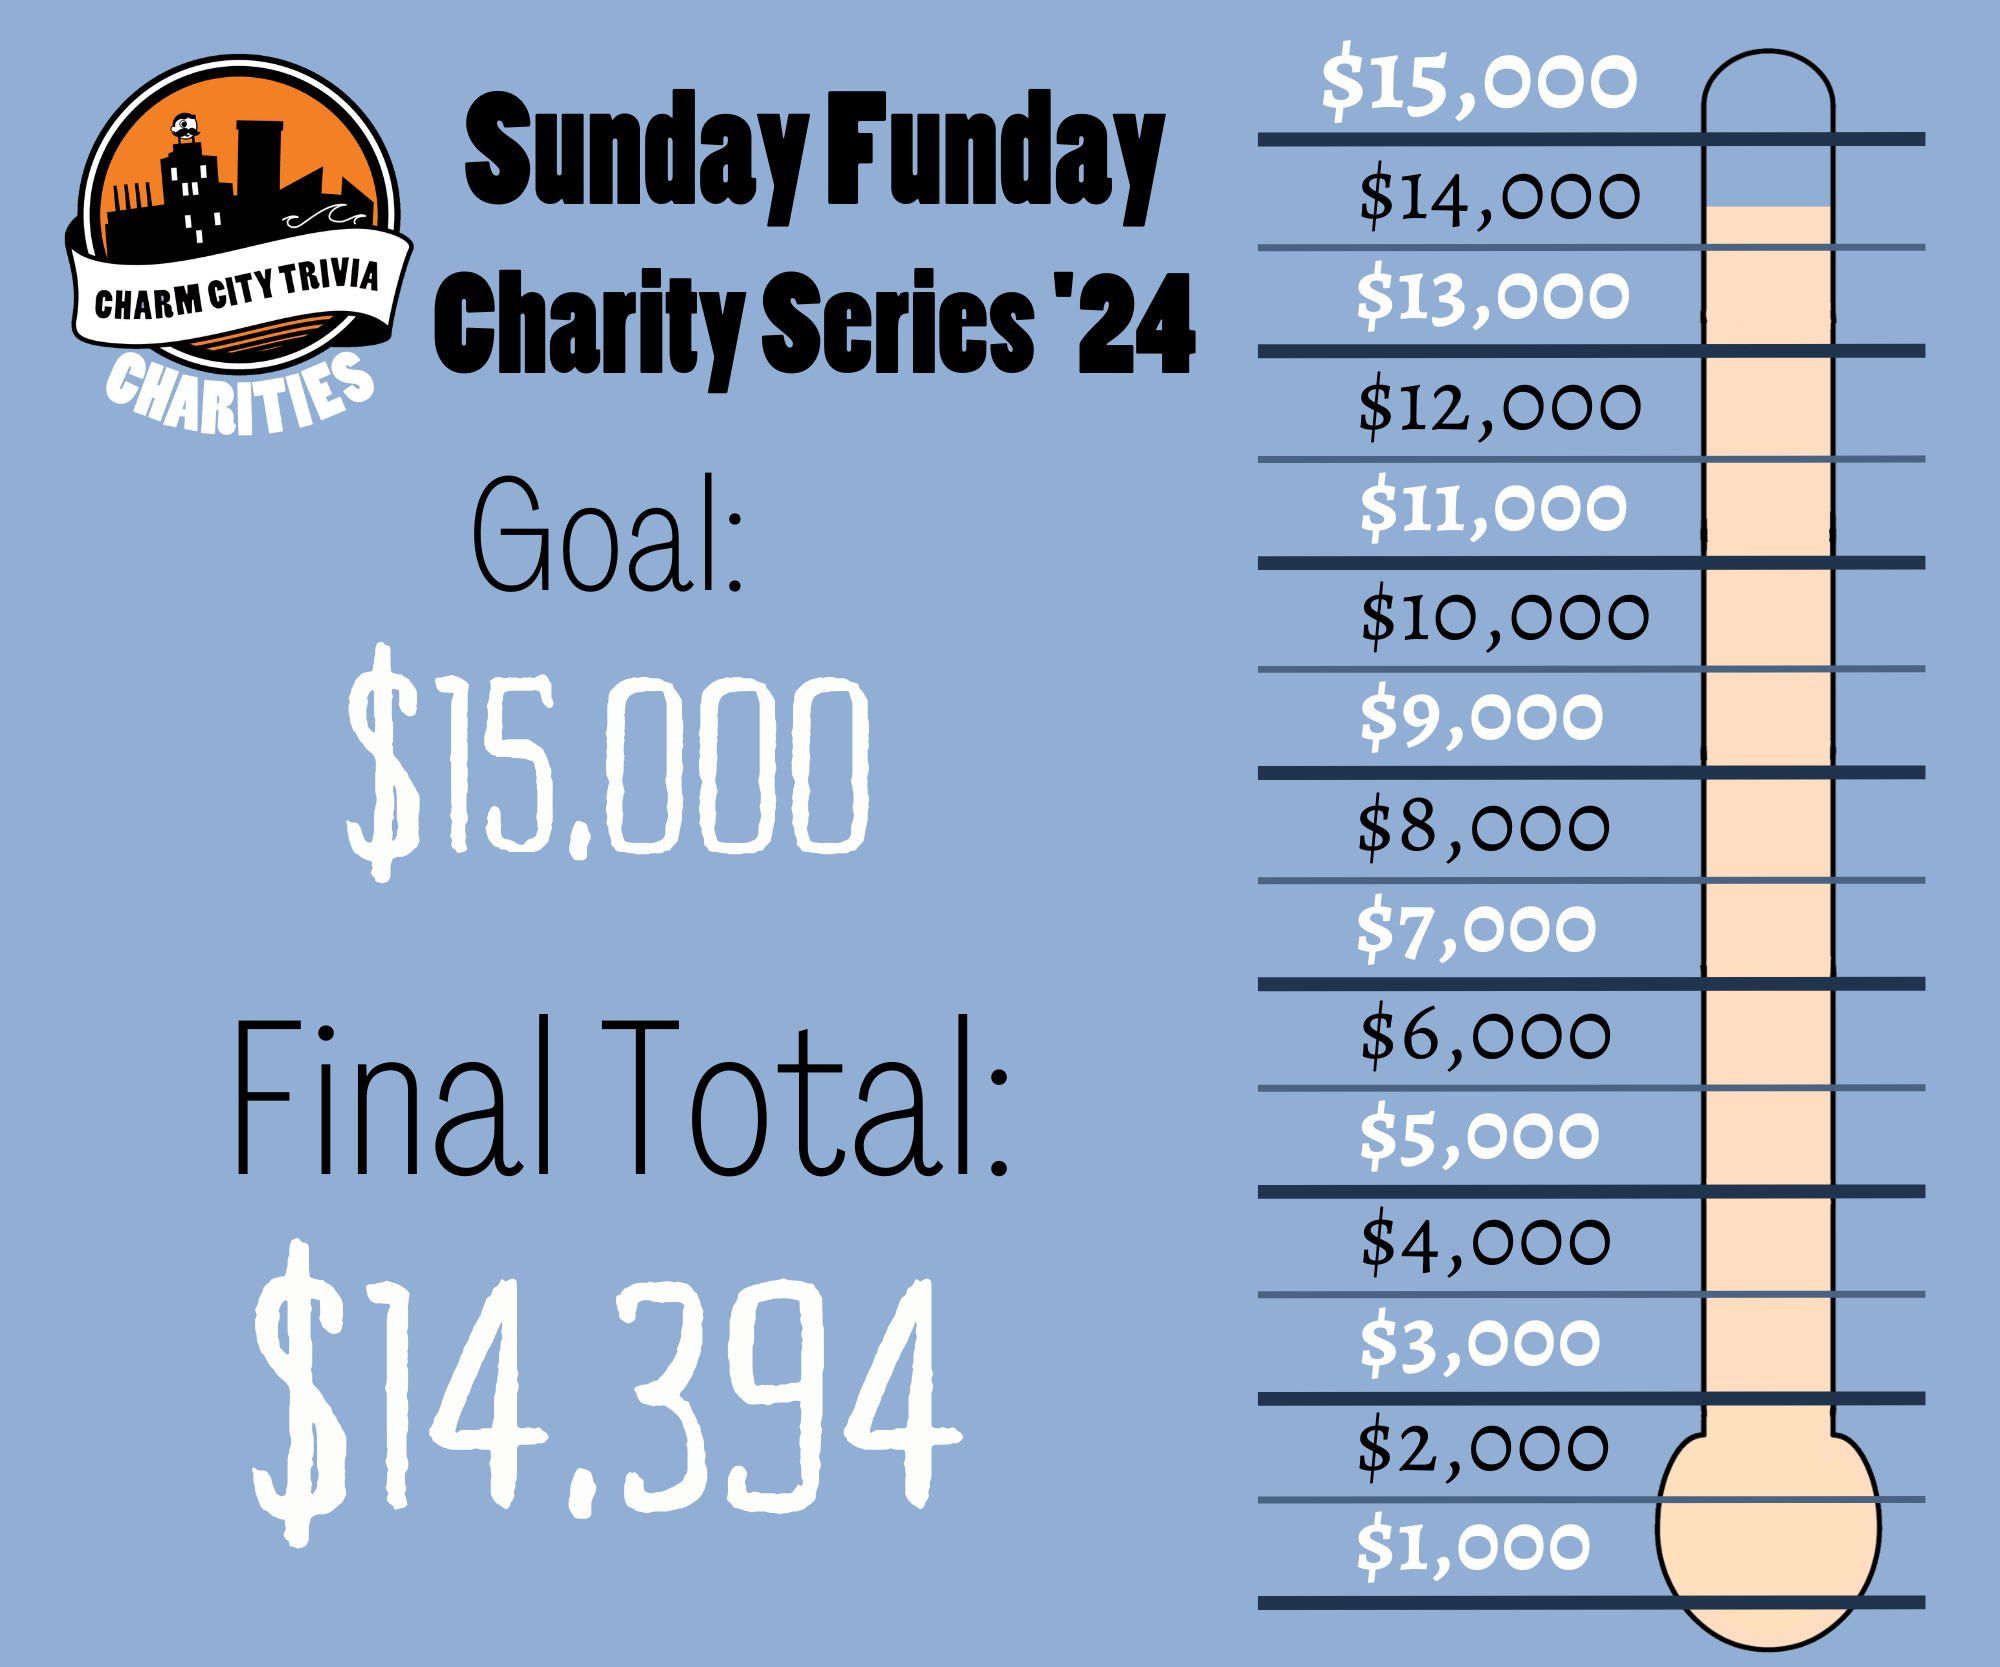 a light blue background with a fundraiser style thermometer, lines separating the thermometer into donation milestones from $1,000 to $15,000, a very light orange bar inside the thermometer that goes to a third of the way between $14,000 and $15,000, the Charm City Trivia Charities logo, and black and white text. The text reads: Sunday Funday Charity Series '24. Goal: $15,000. Final Total: $14,394